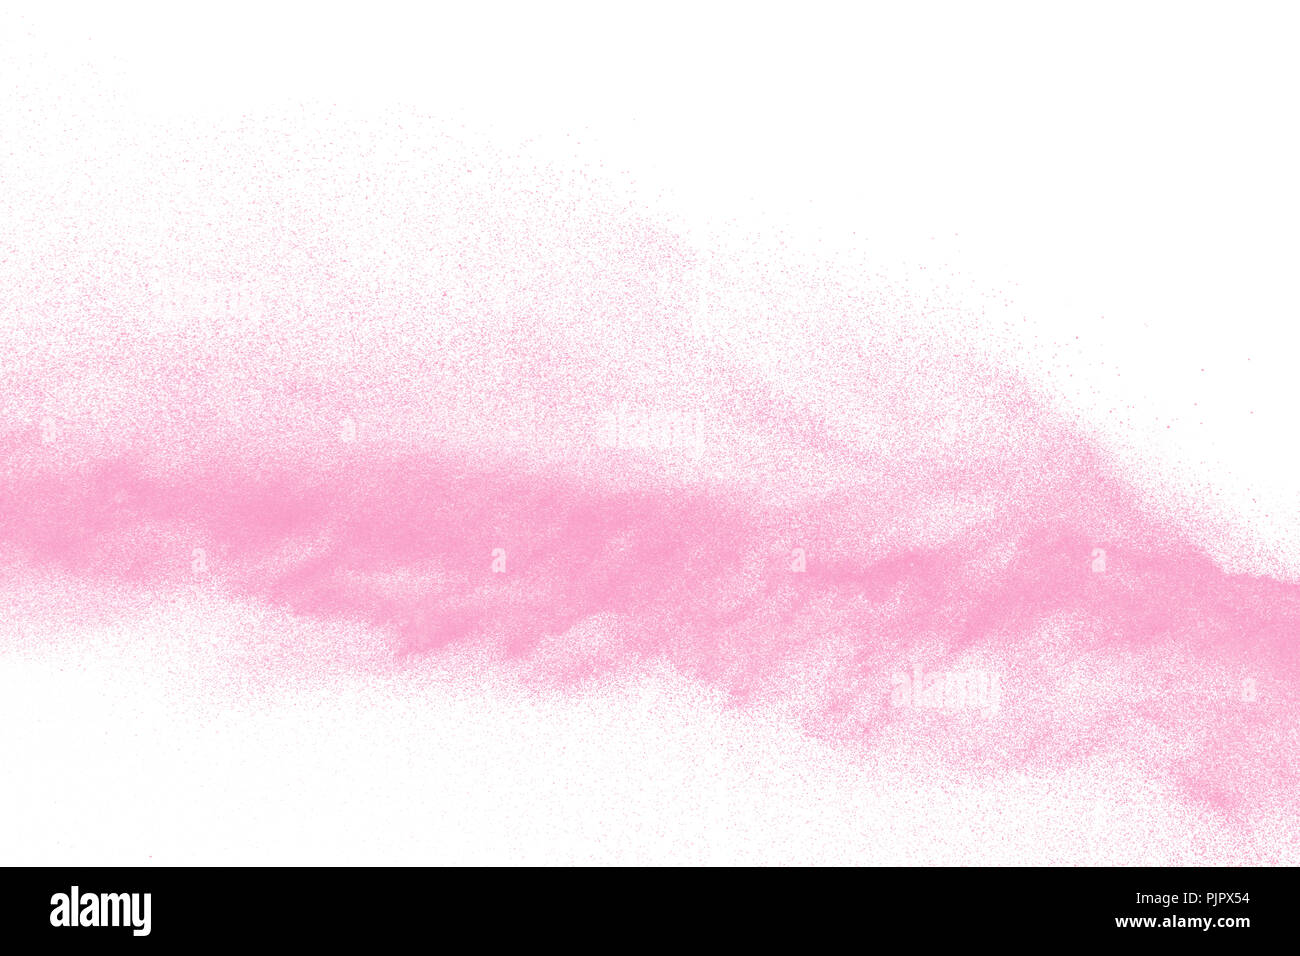 Dry river sand explosion. Pink colored sand splash against  white background. Stock Photo